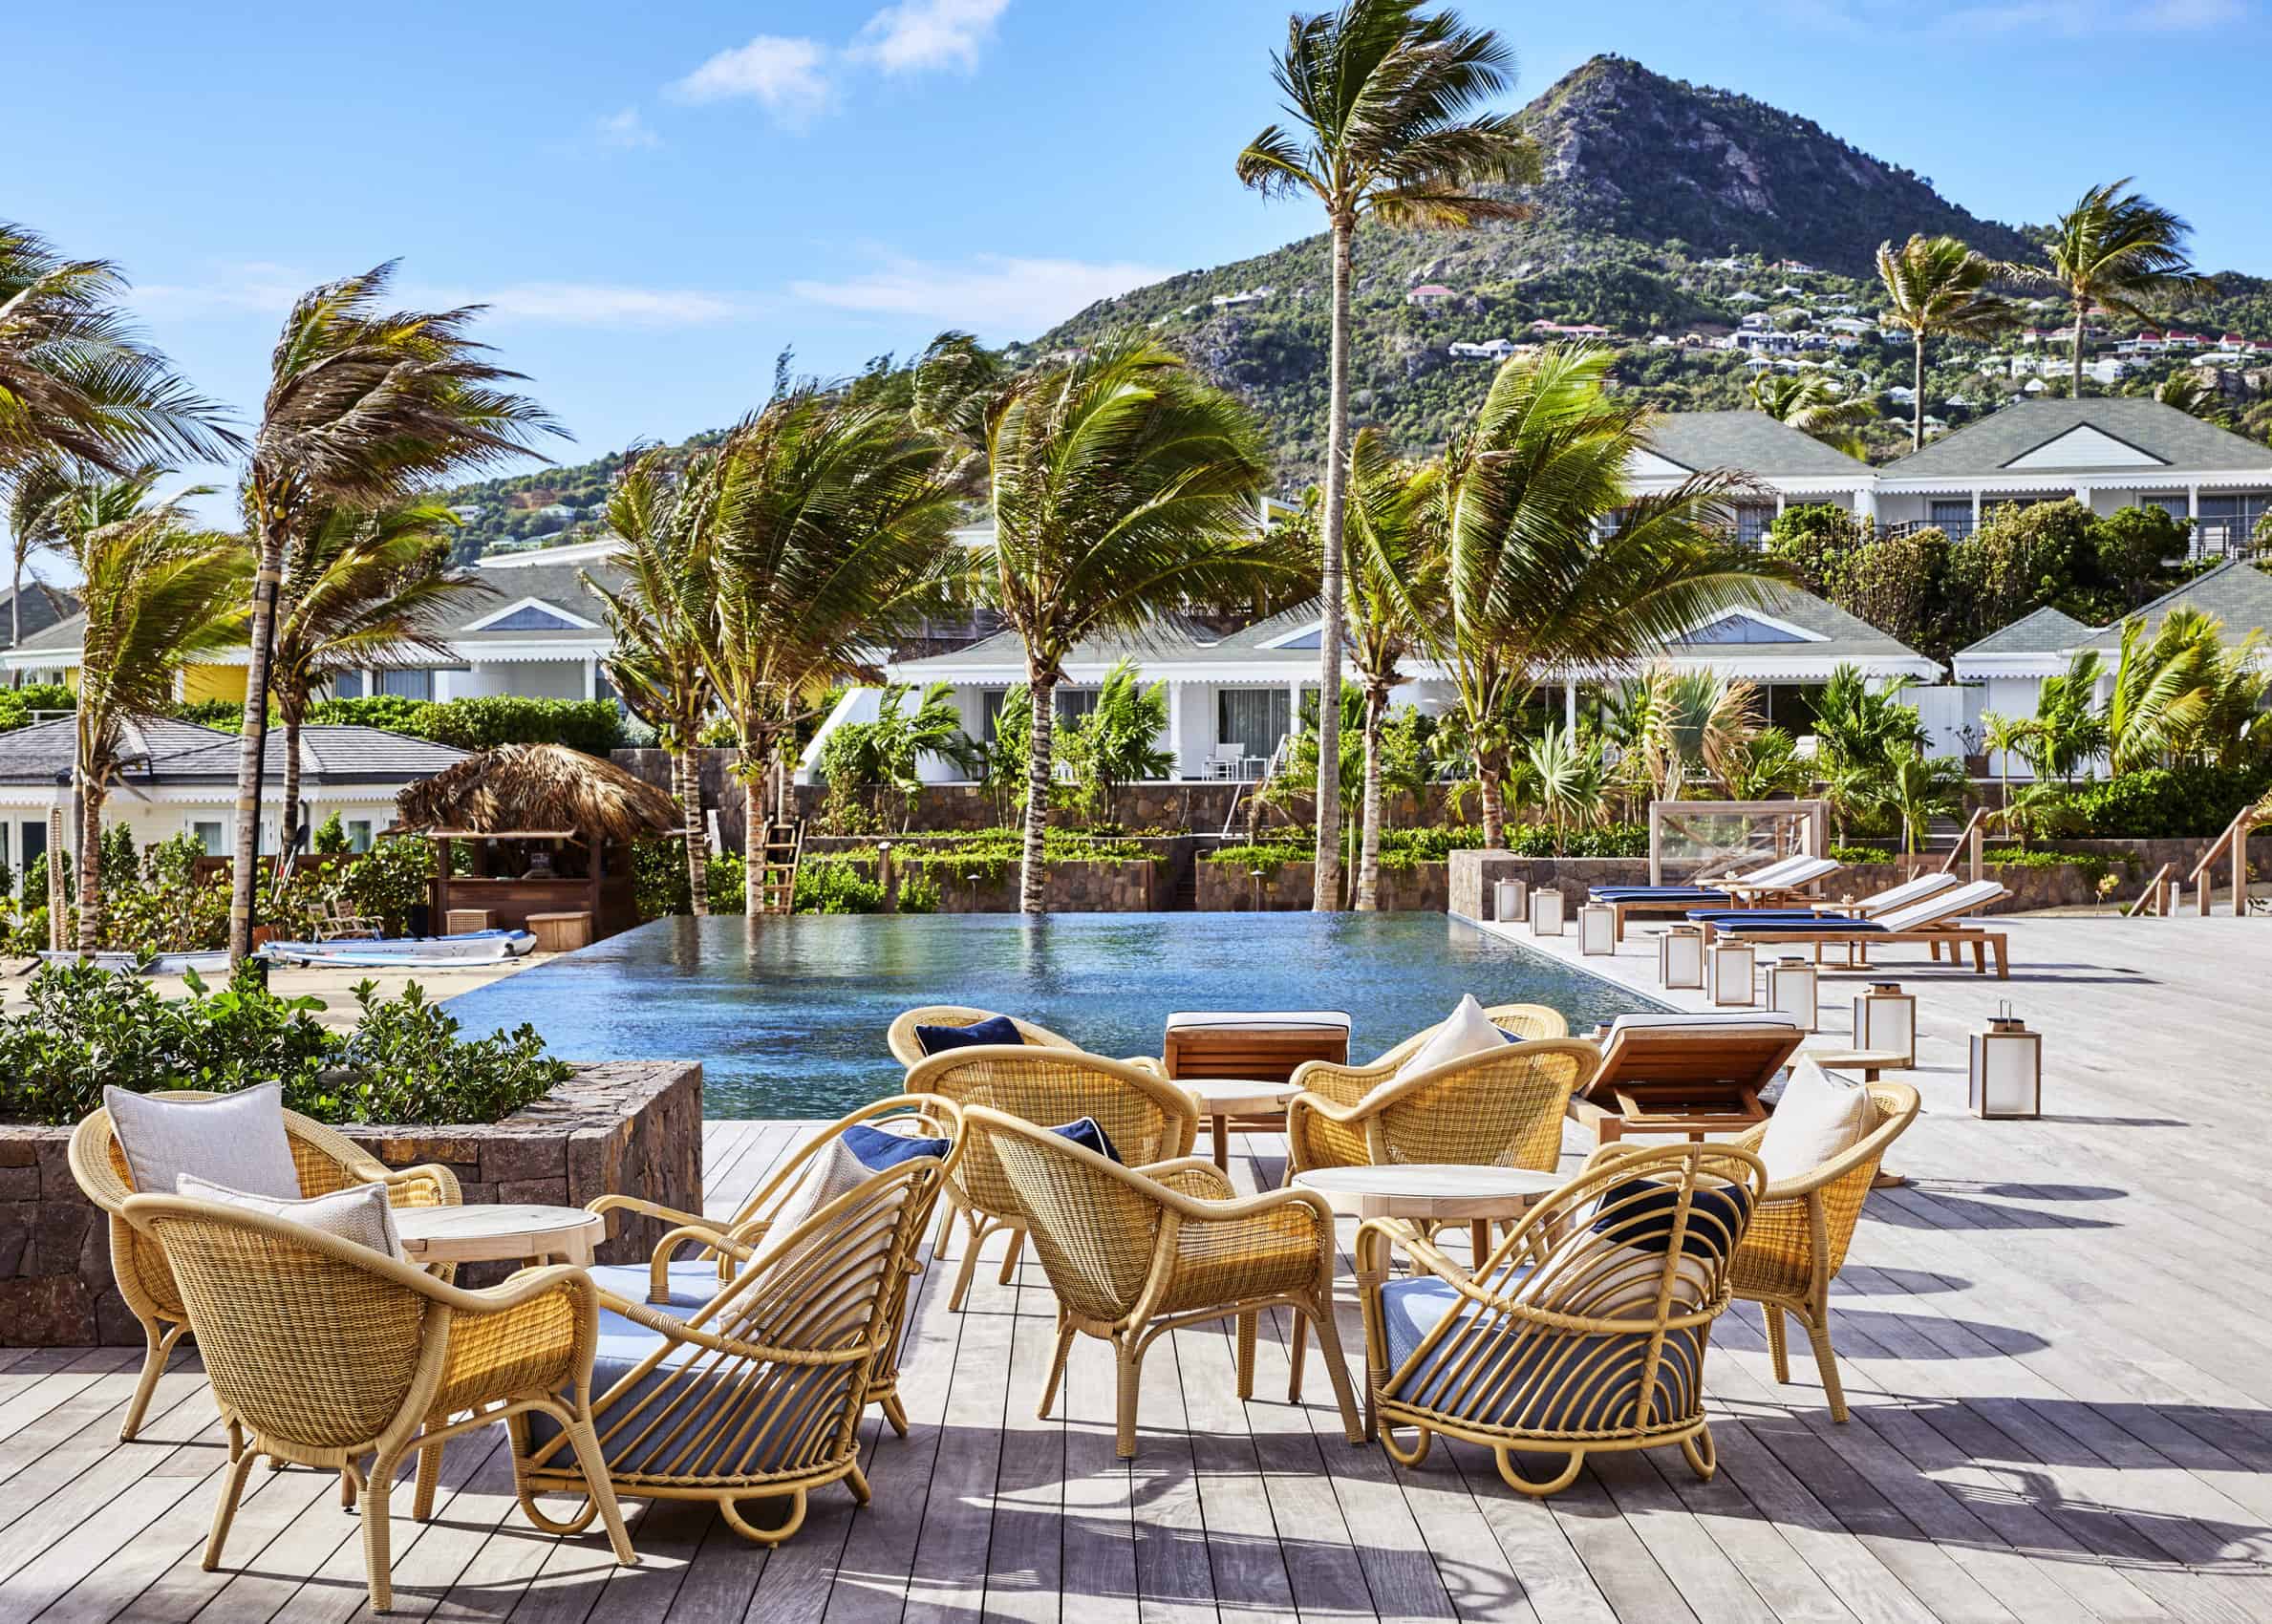 Vogue's St. Barths Travel Guide